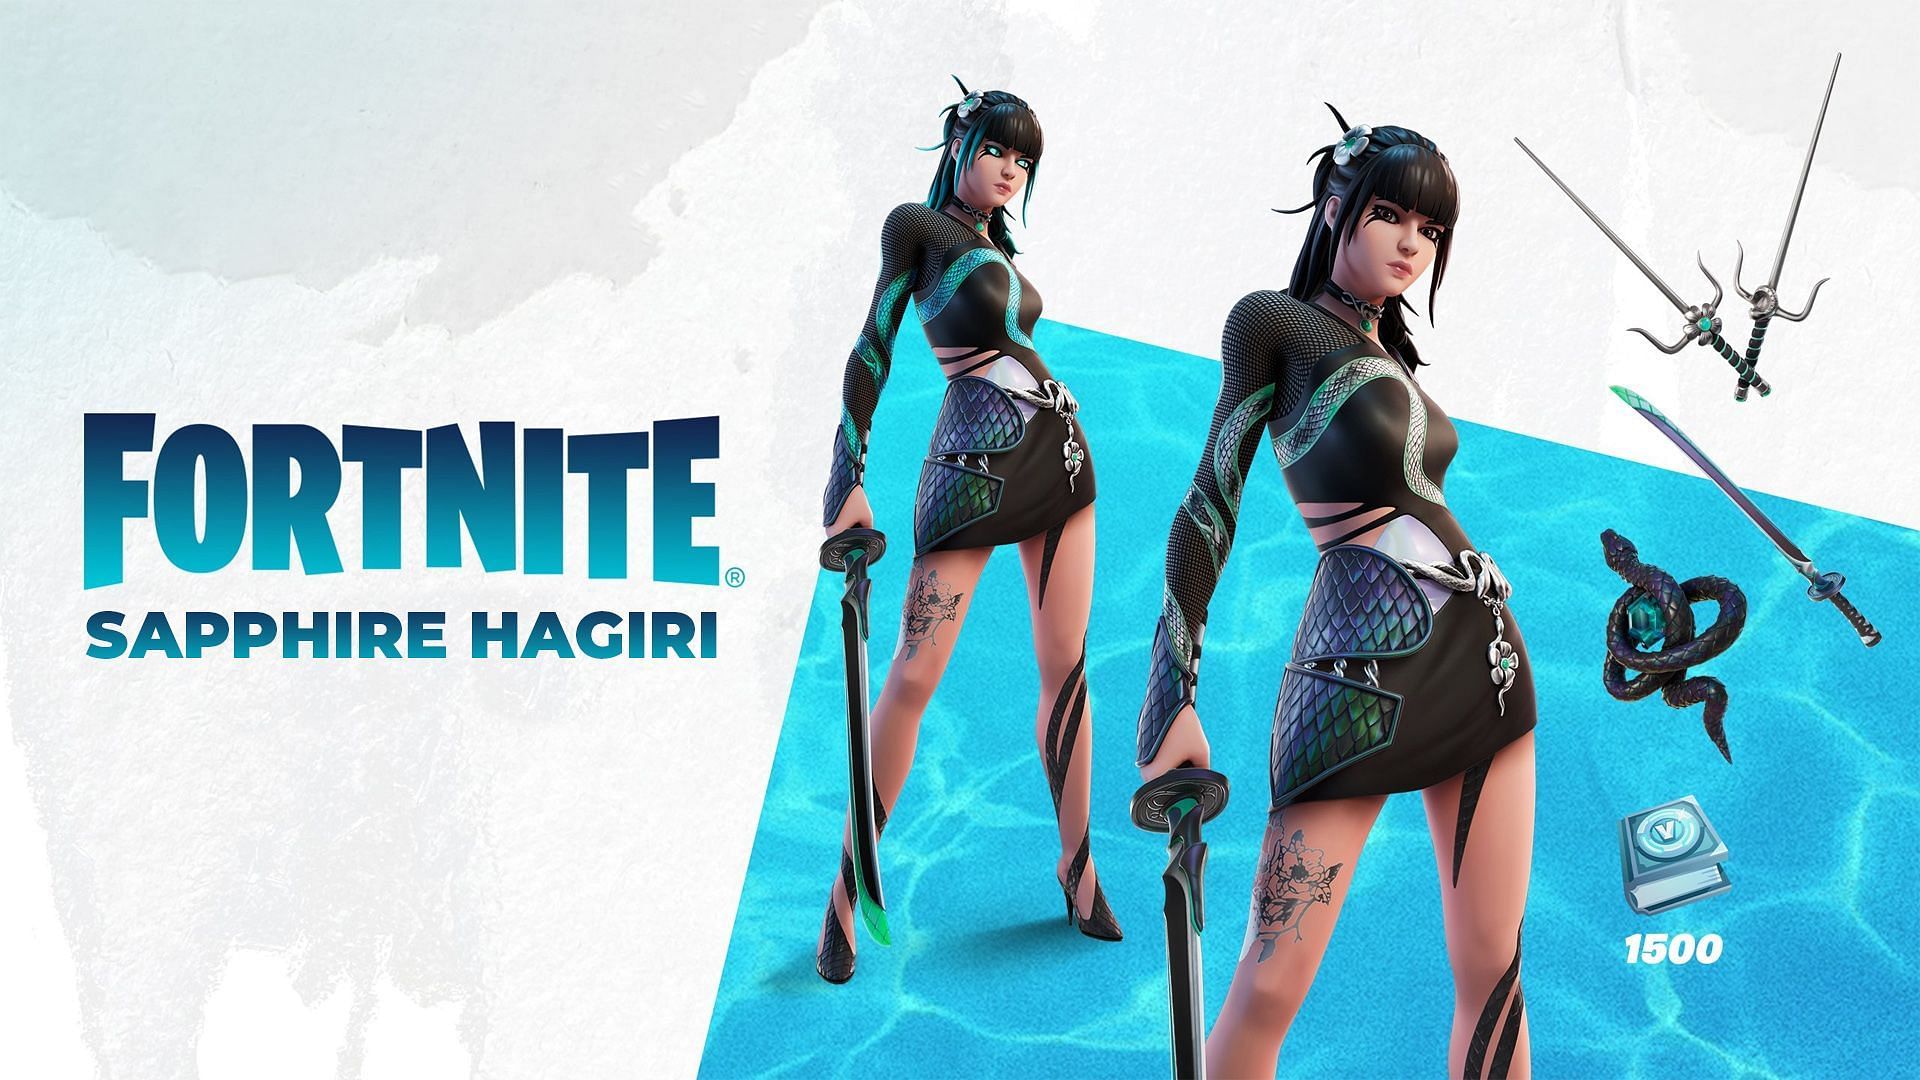 The Sapphire Hagiri quest pack is coming soon to Fortnite Battle Royale (Image via Epic Games)